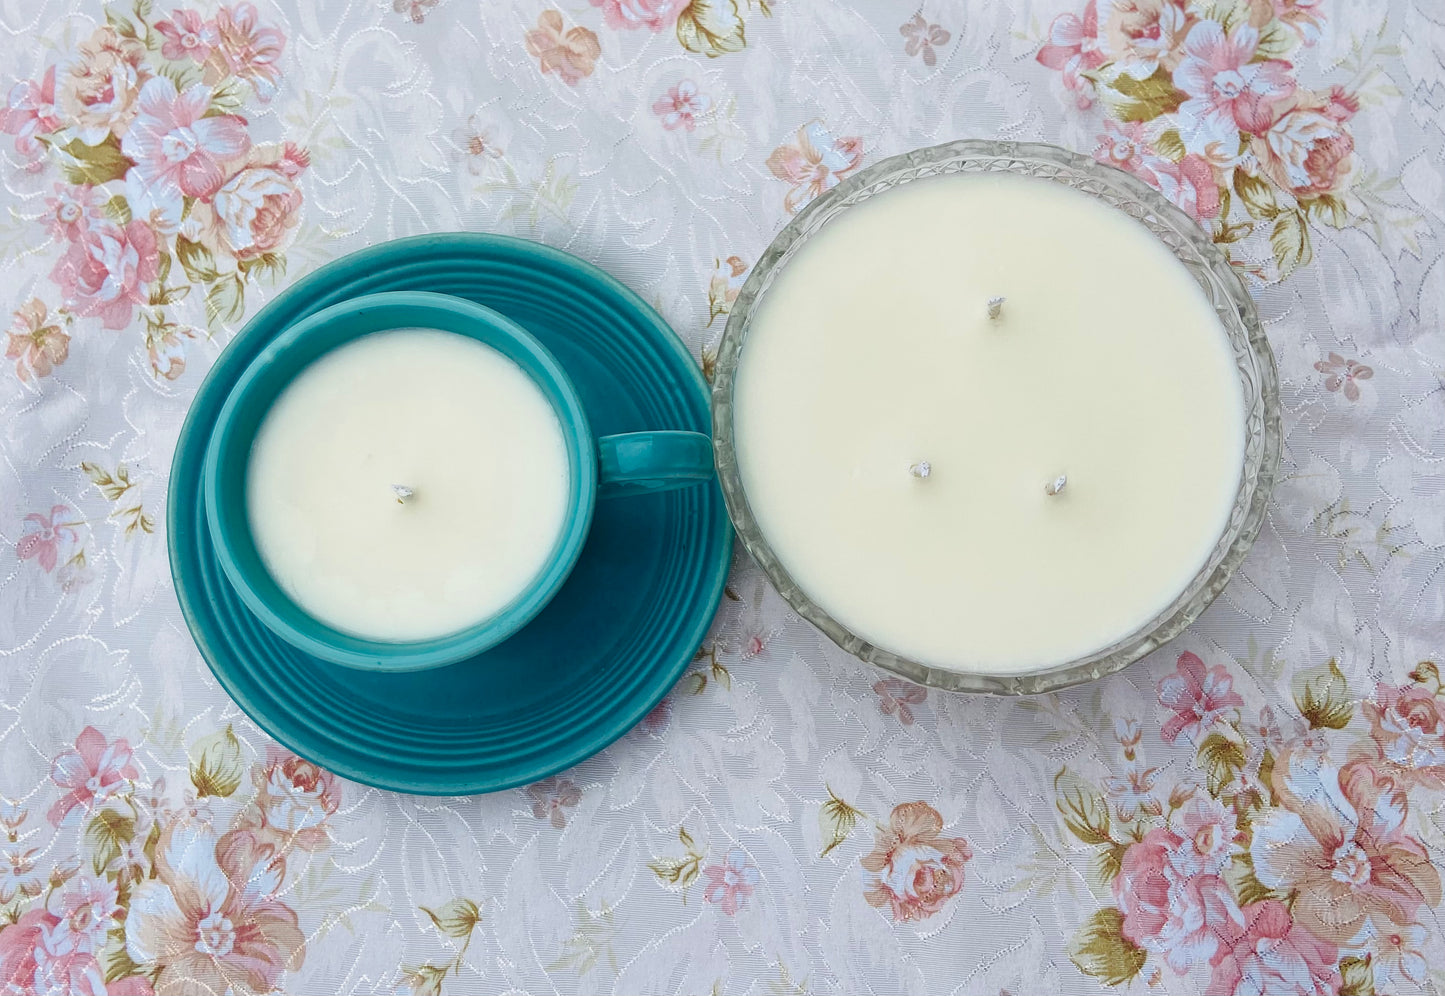 Strudel & Spice Candles